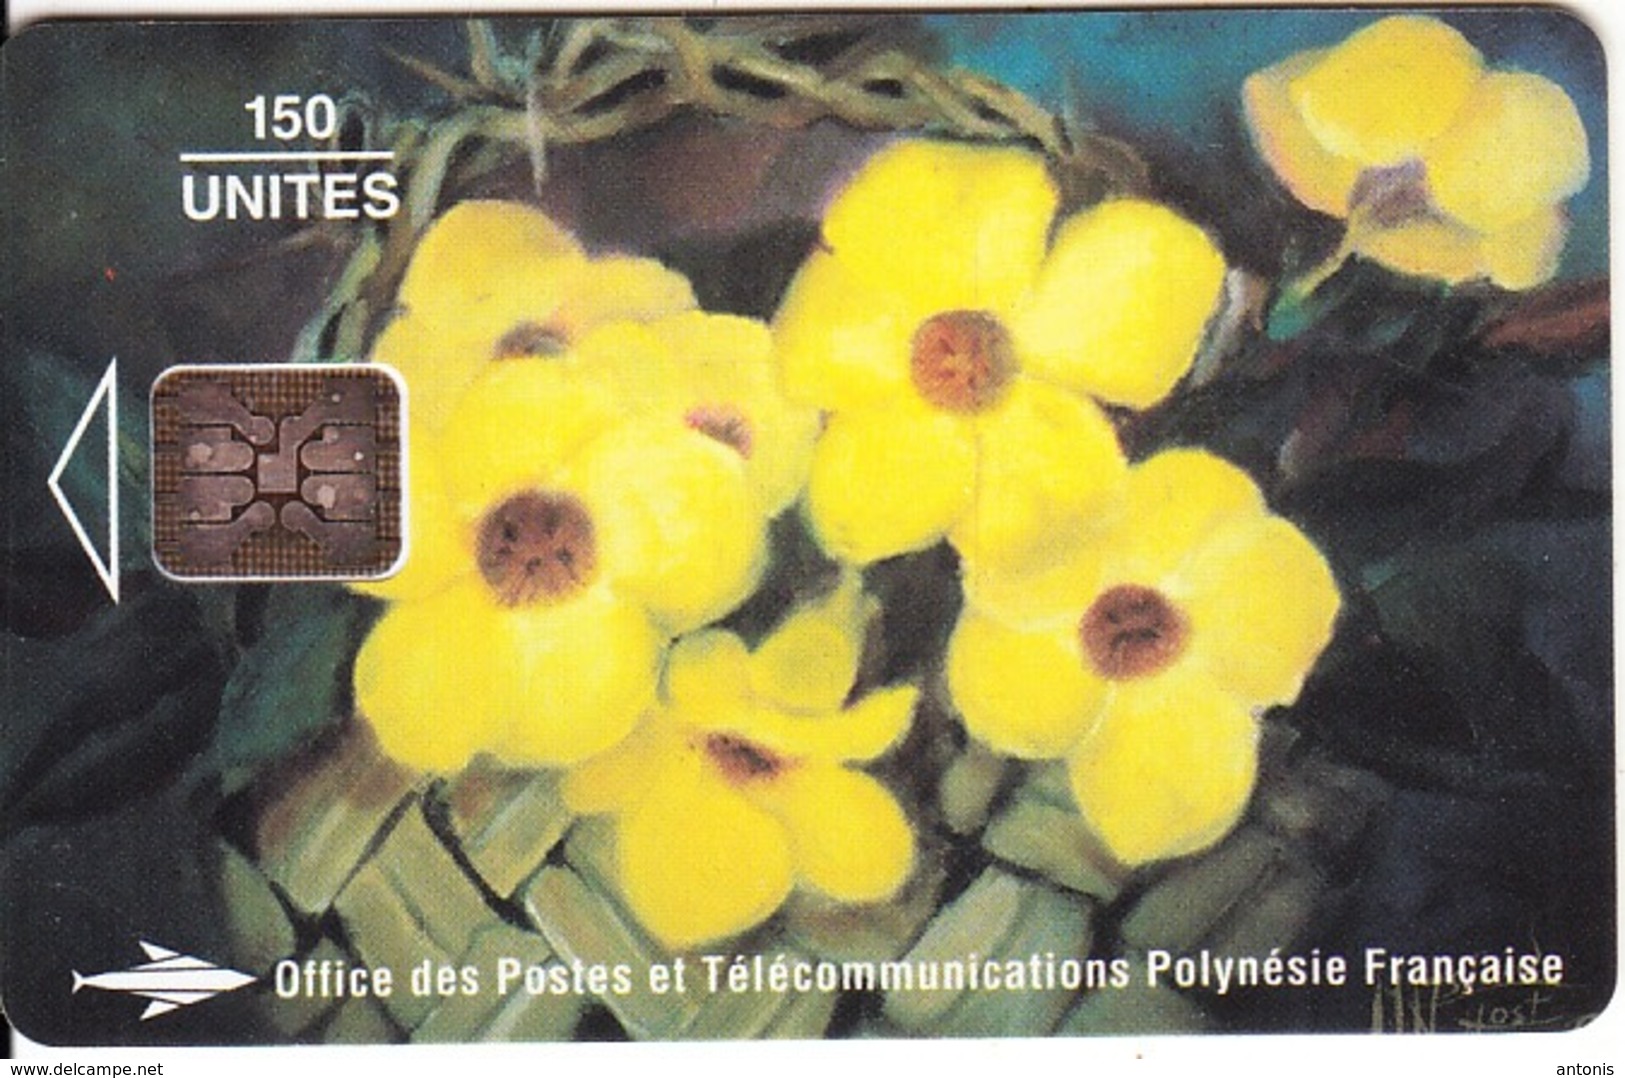 FRENCH POLYNESIA - Les Monettes, Painting/Marie Astrid Host, CN : C47100868, Tirage %20000, 08/94, Used - Polinesia Francesa